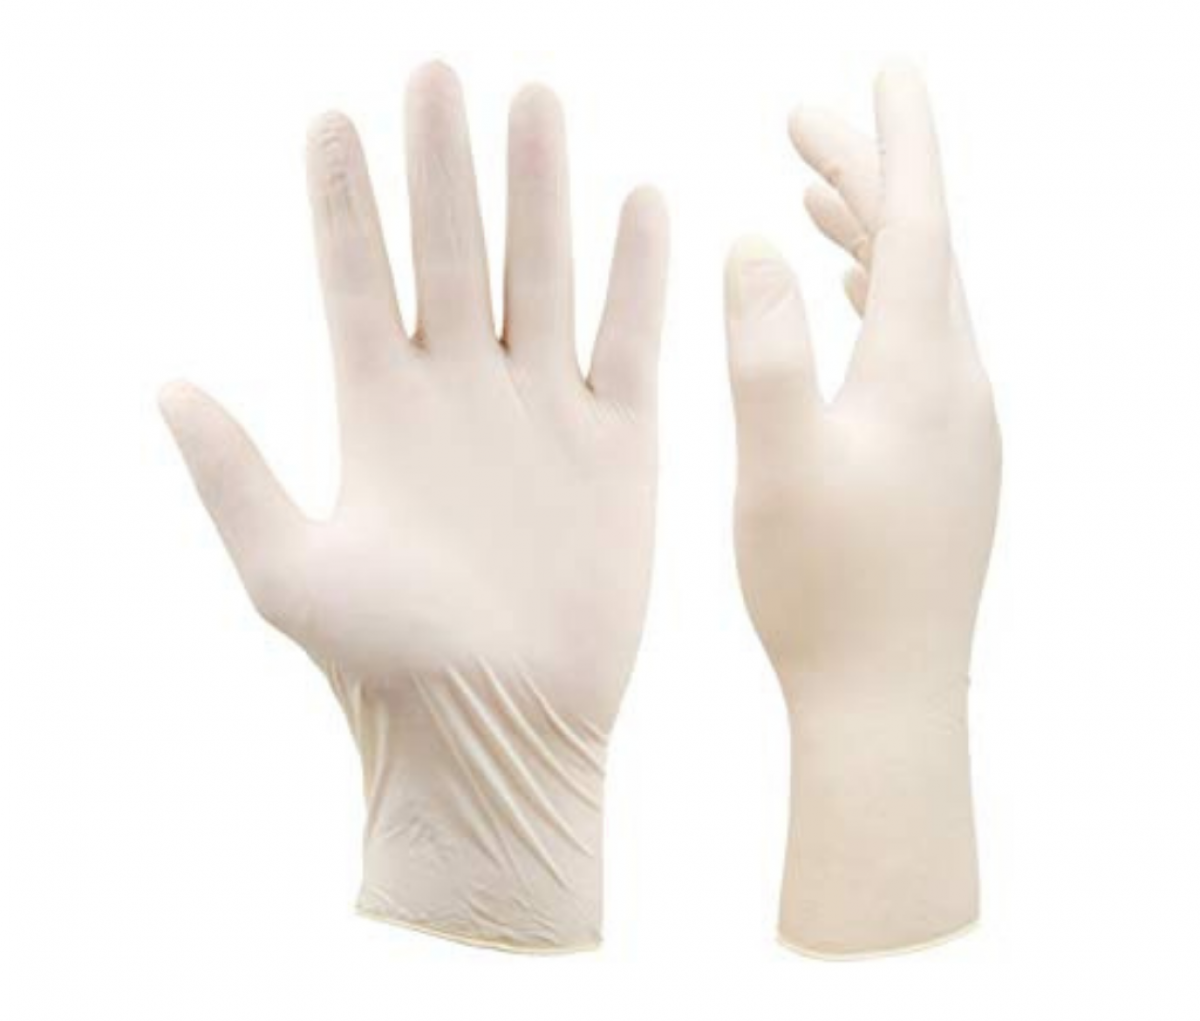 Gloves Surgical Sterile Size 7.5